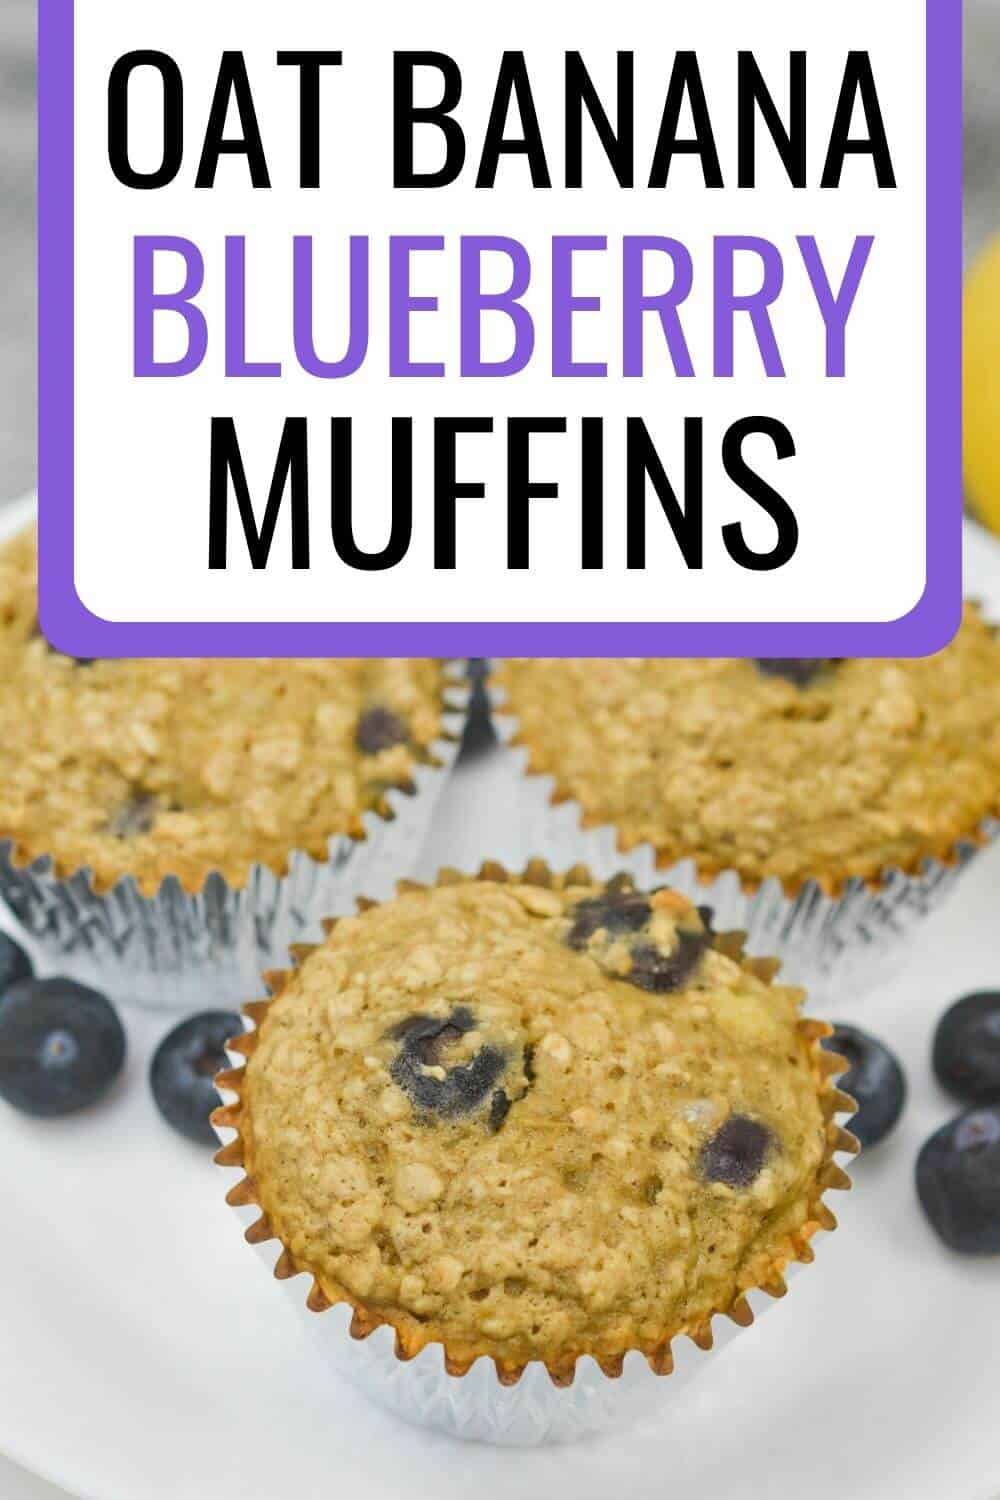 Oat banana blueberry muffins with text.